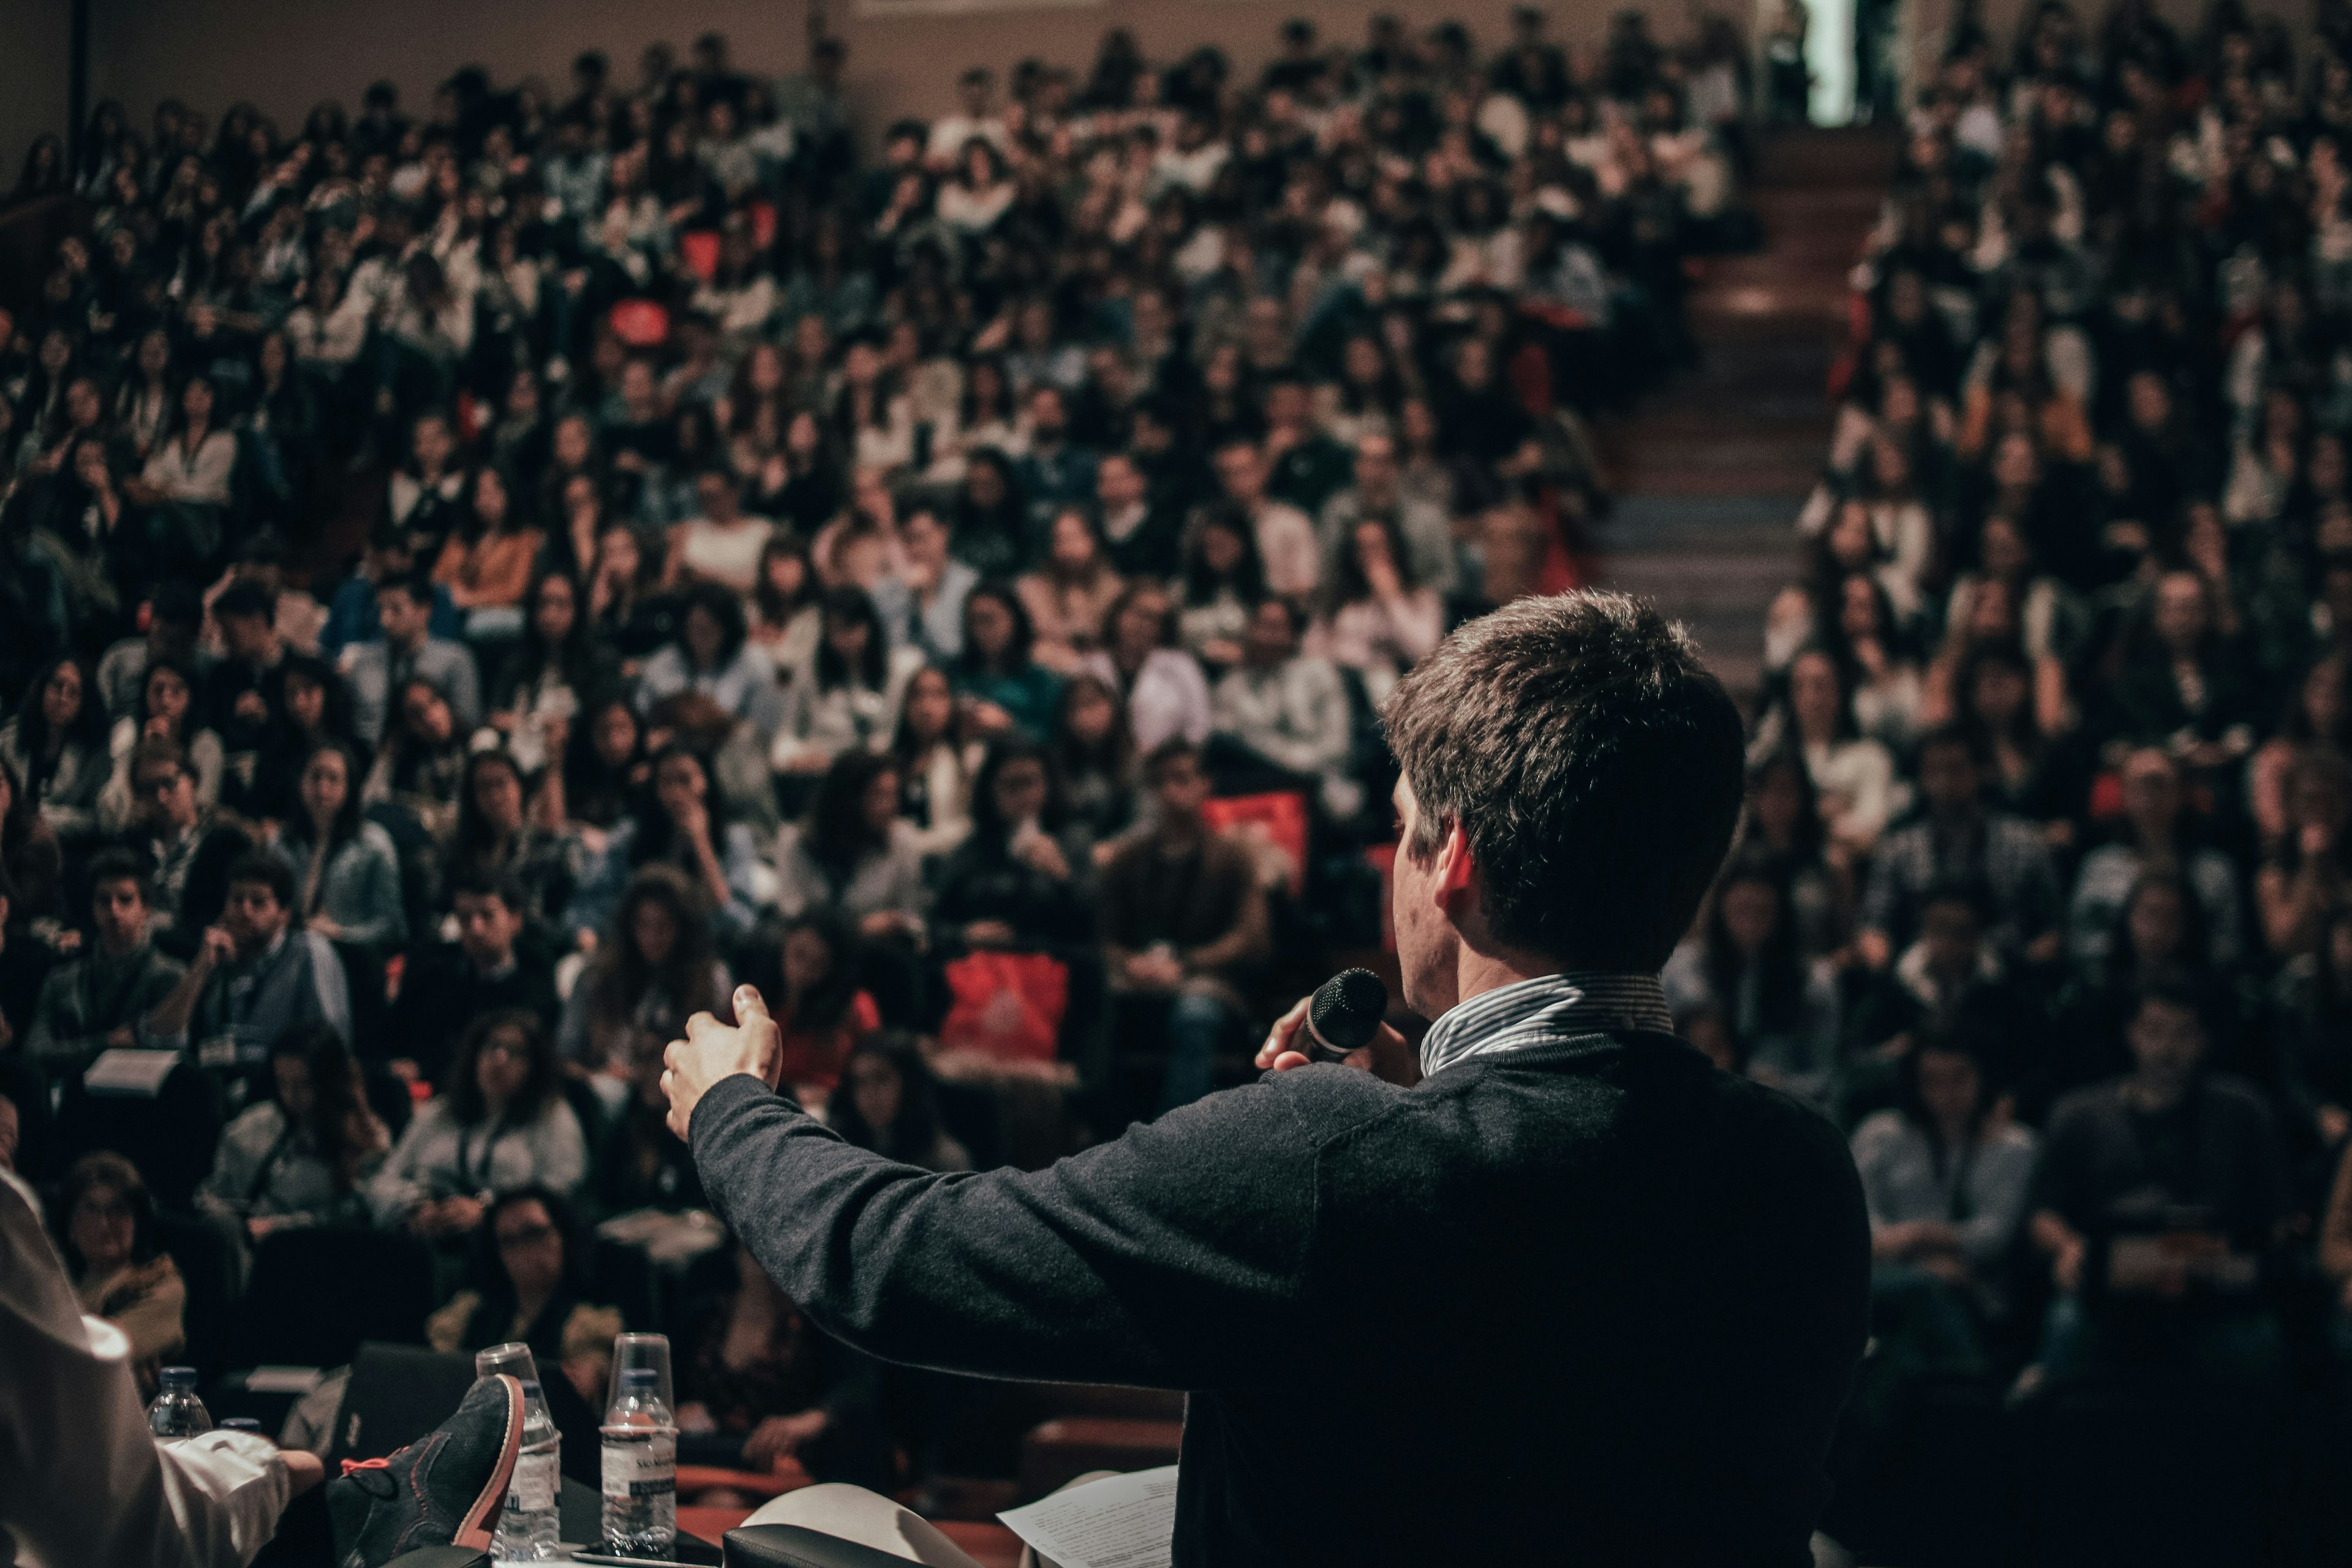 A person giving a speech in front of a conference